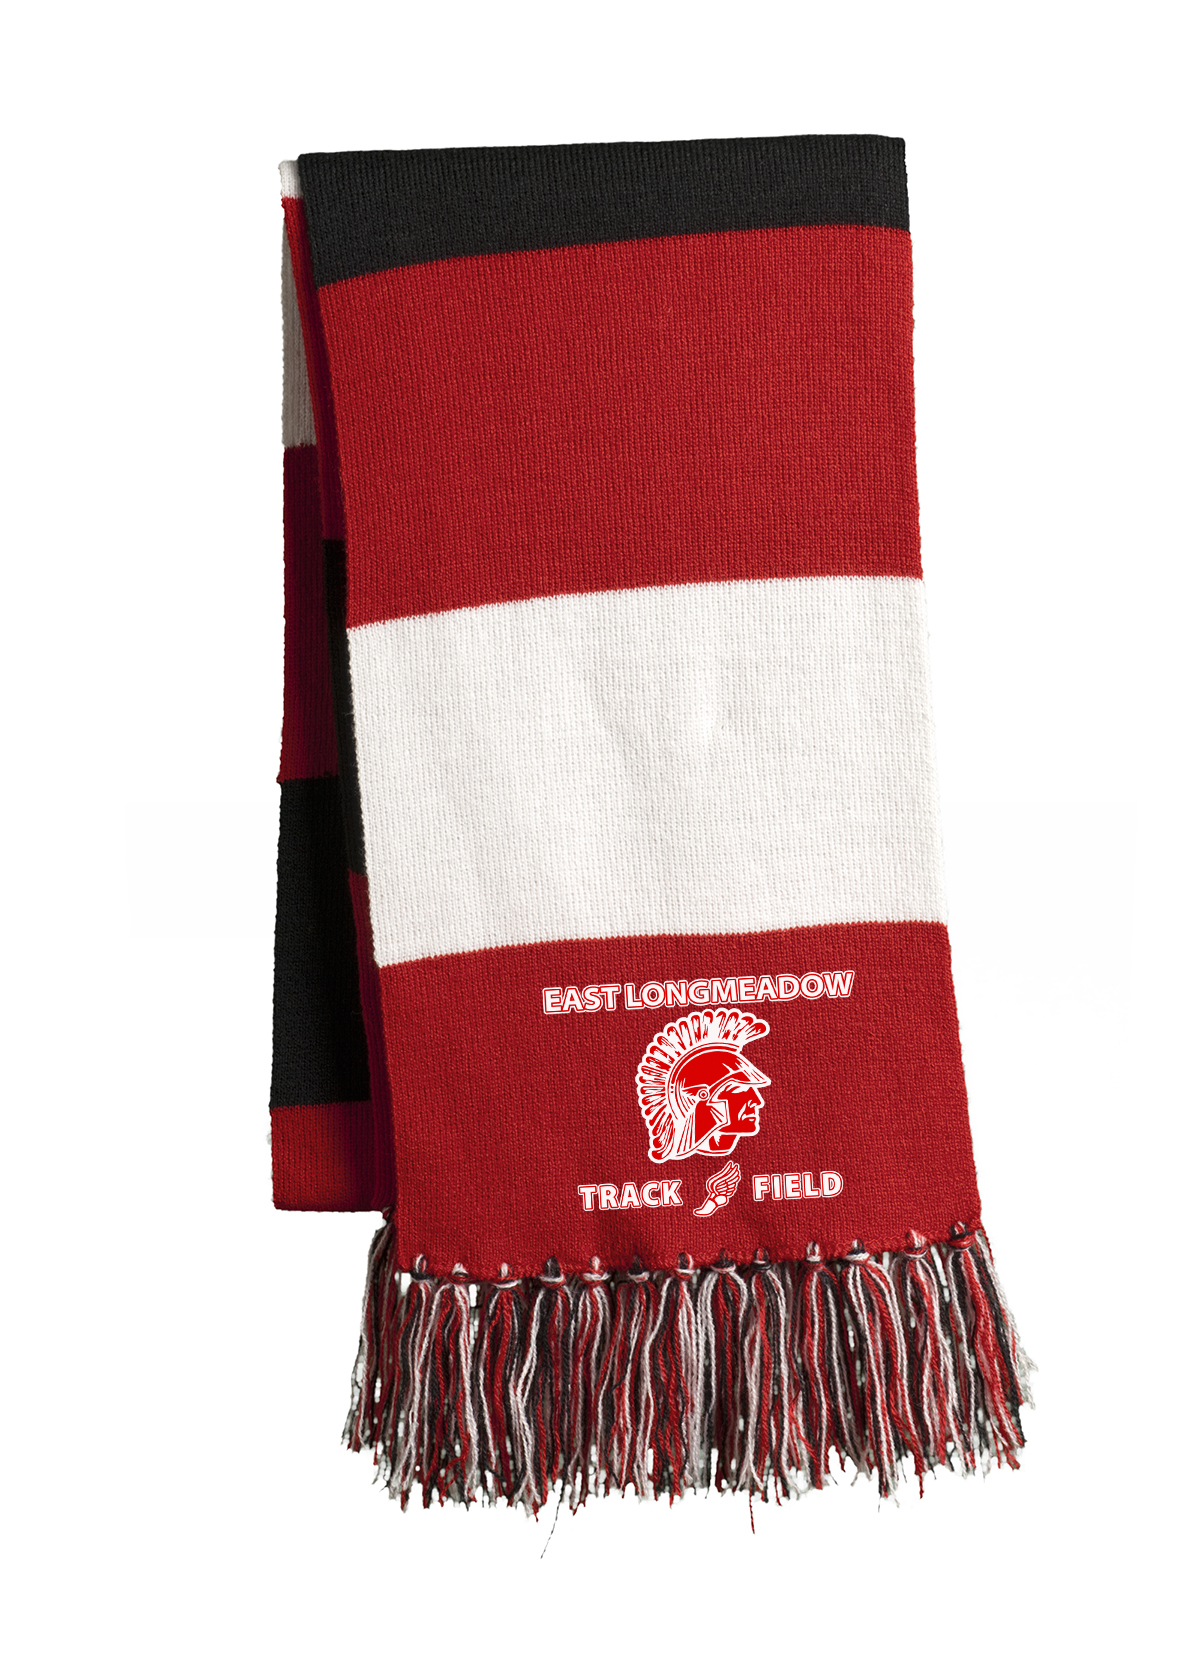 East Longmeadow Track and Field Red/Black/White Team Scarf